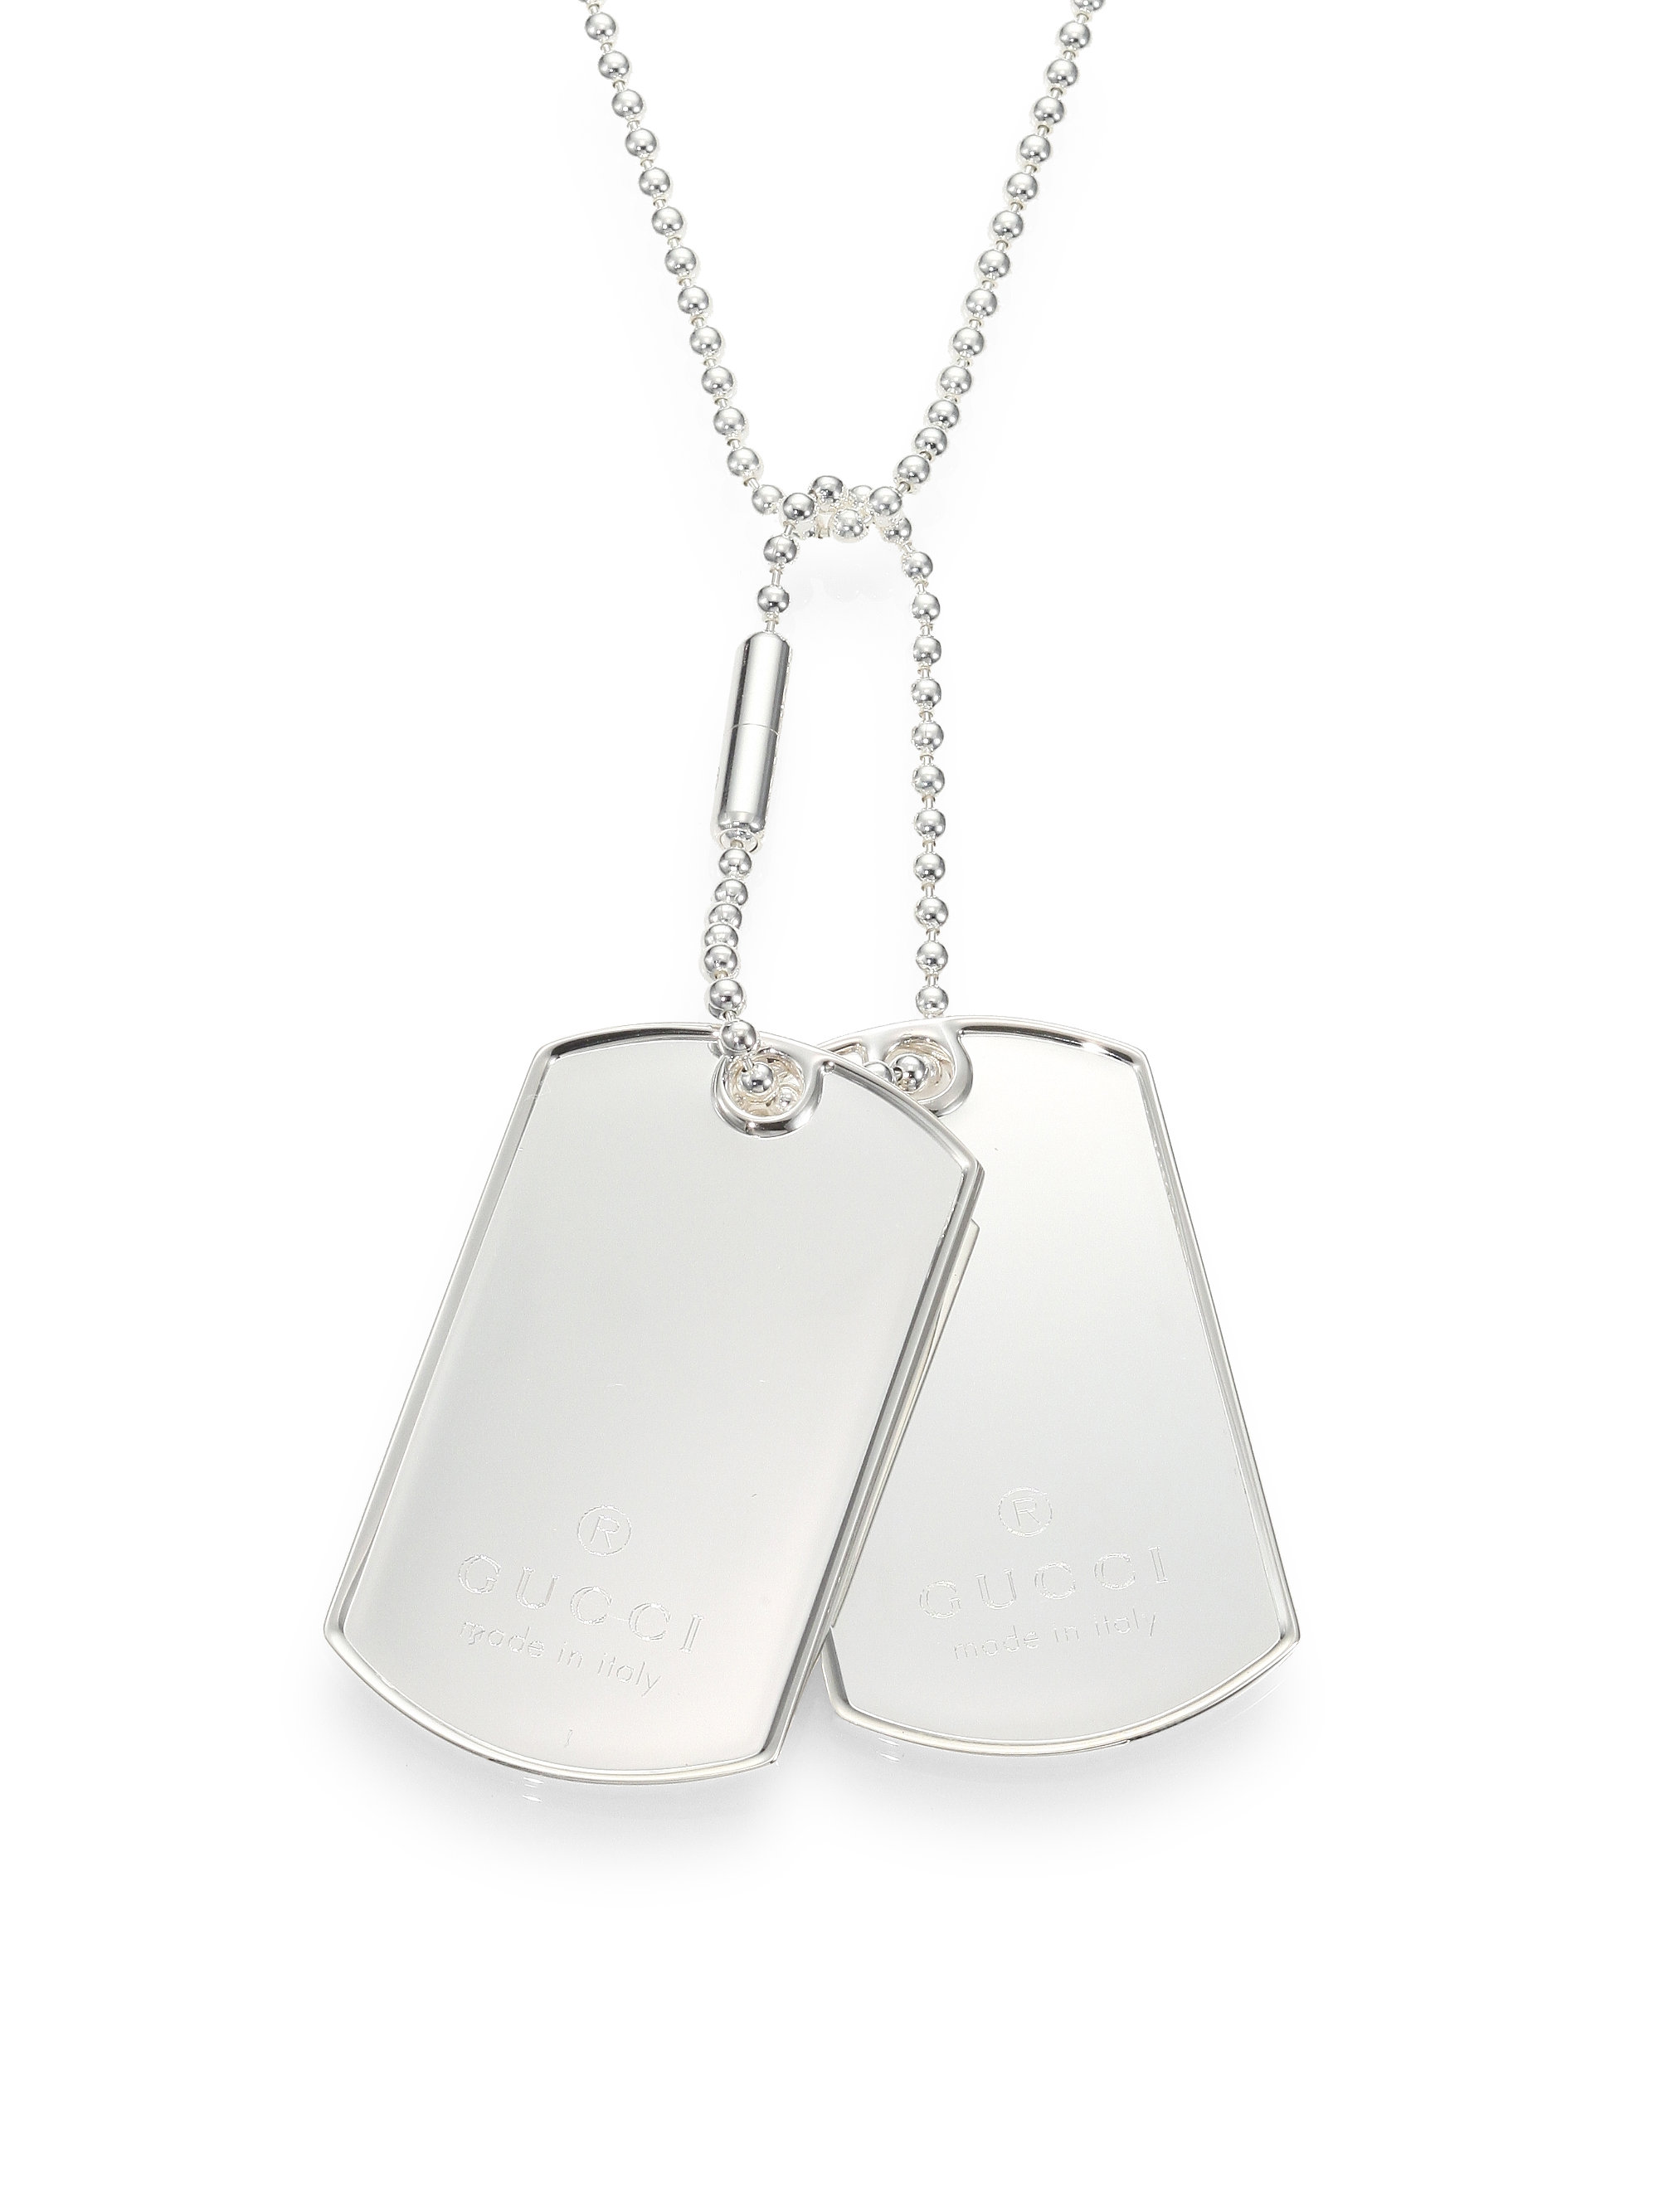 gucci sterling silver dog tag necklace